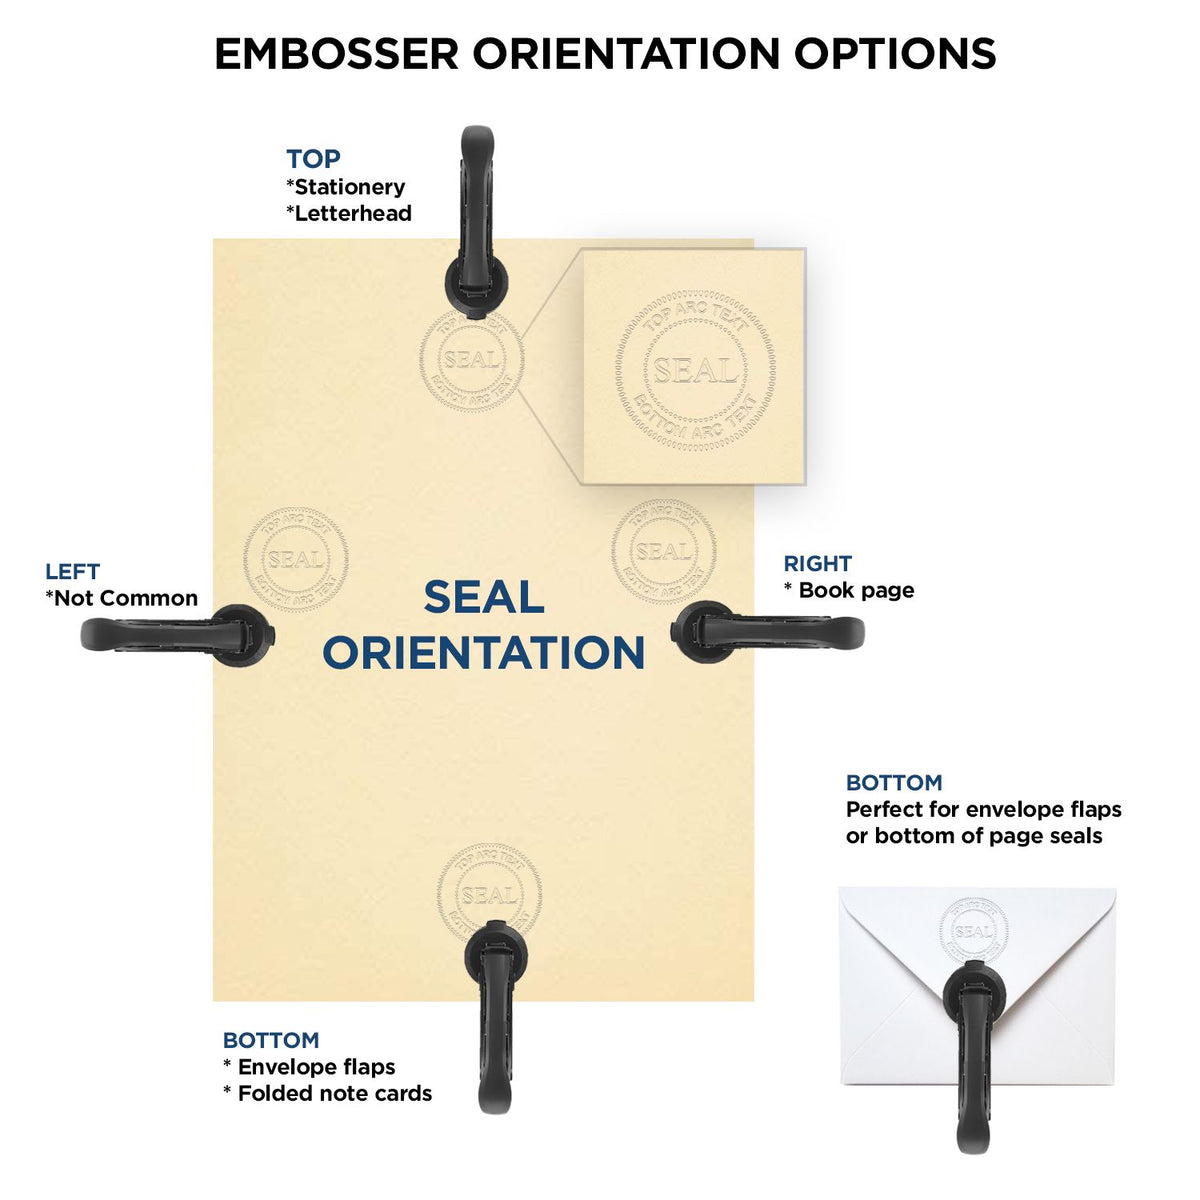 An infographic for the Arkansas Engineer Desk Seal showing embosser orientation, this is showing examples of a top, bottom, right and left insert.